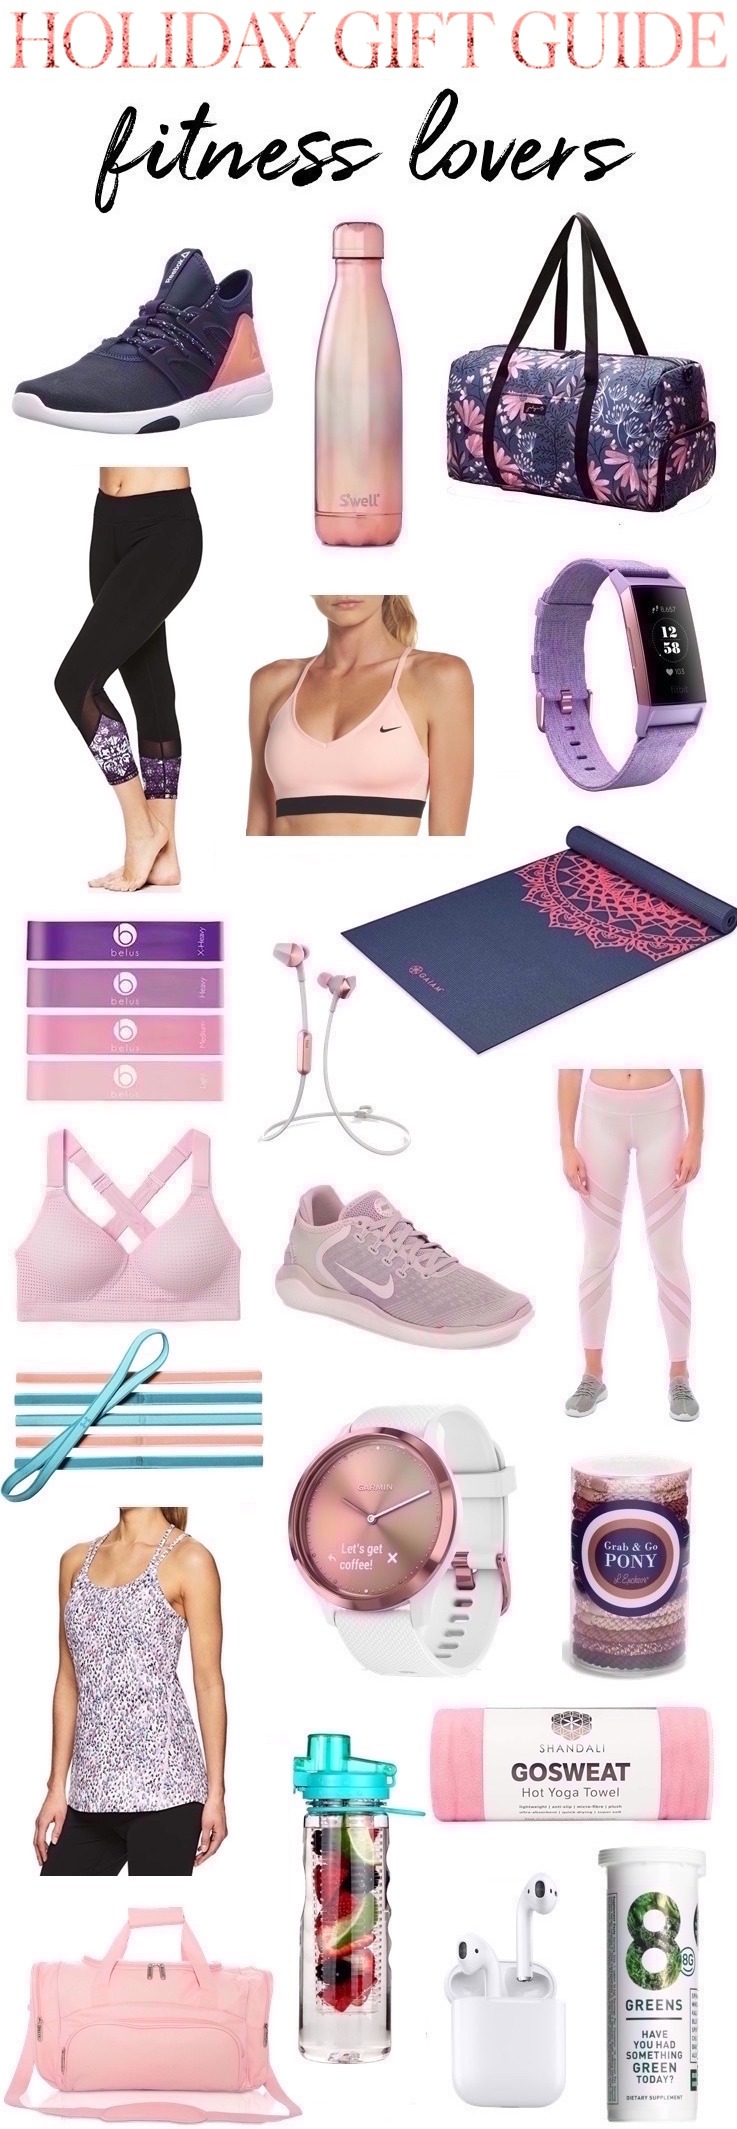 25 Holiday gift ideas for fitness fanatics! These fun, fitness finds are sure to be a hit with your favorite fit chick! #fitnessgiftideas #bestfitnessgifts #fitnessgiftsforher